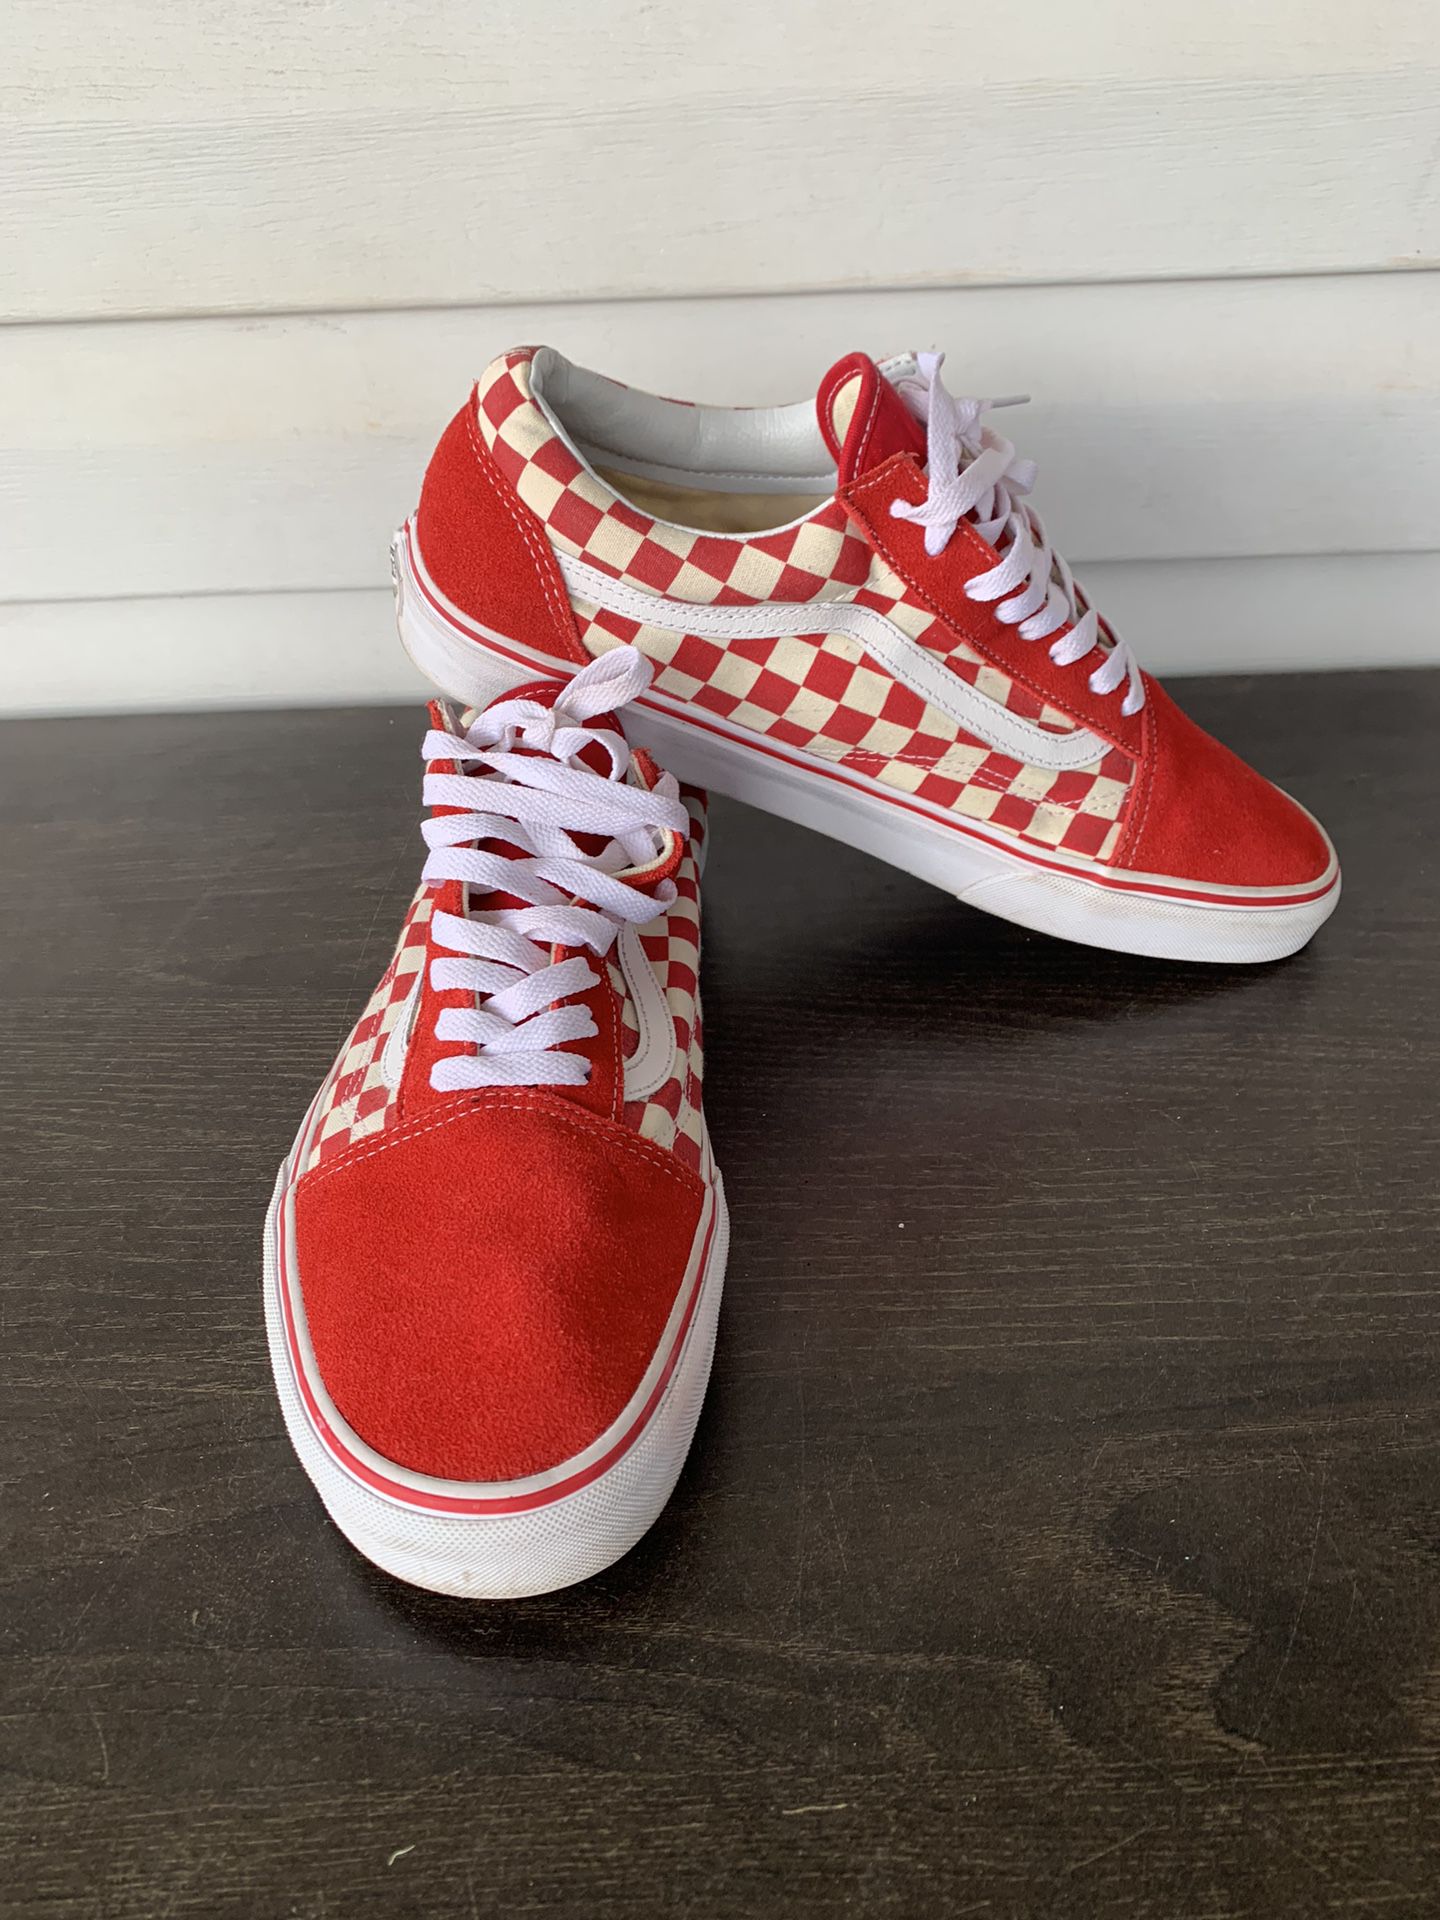 Vans Old Skool Mens Size 12  Red Checkerboard Canvas Suede Skate Shoes Checkered